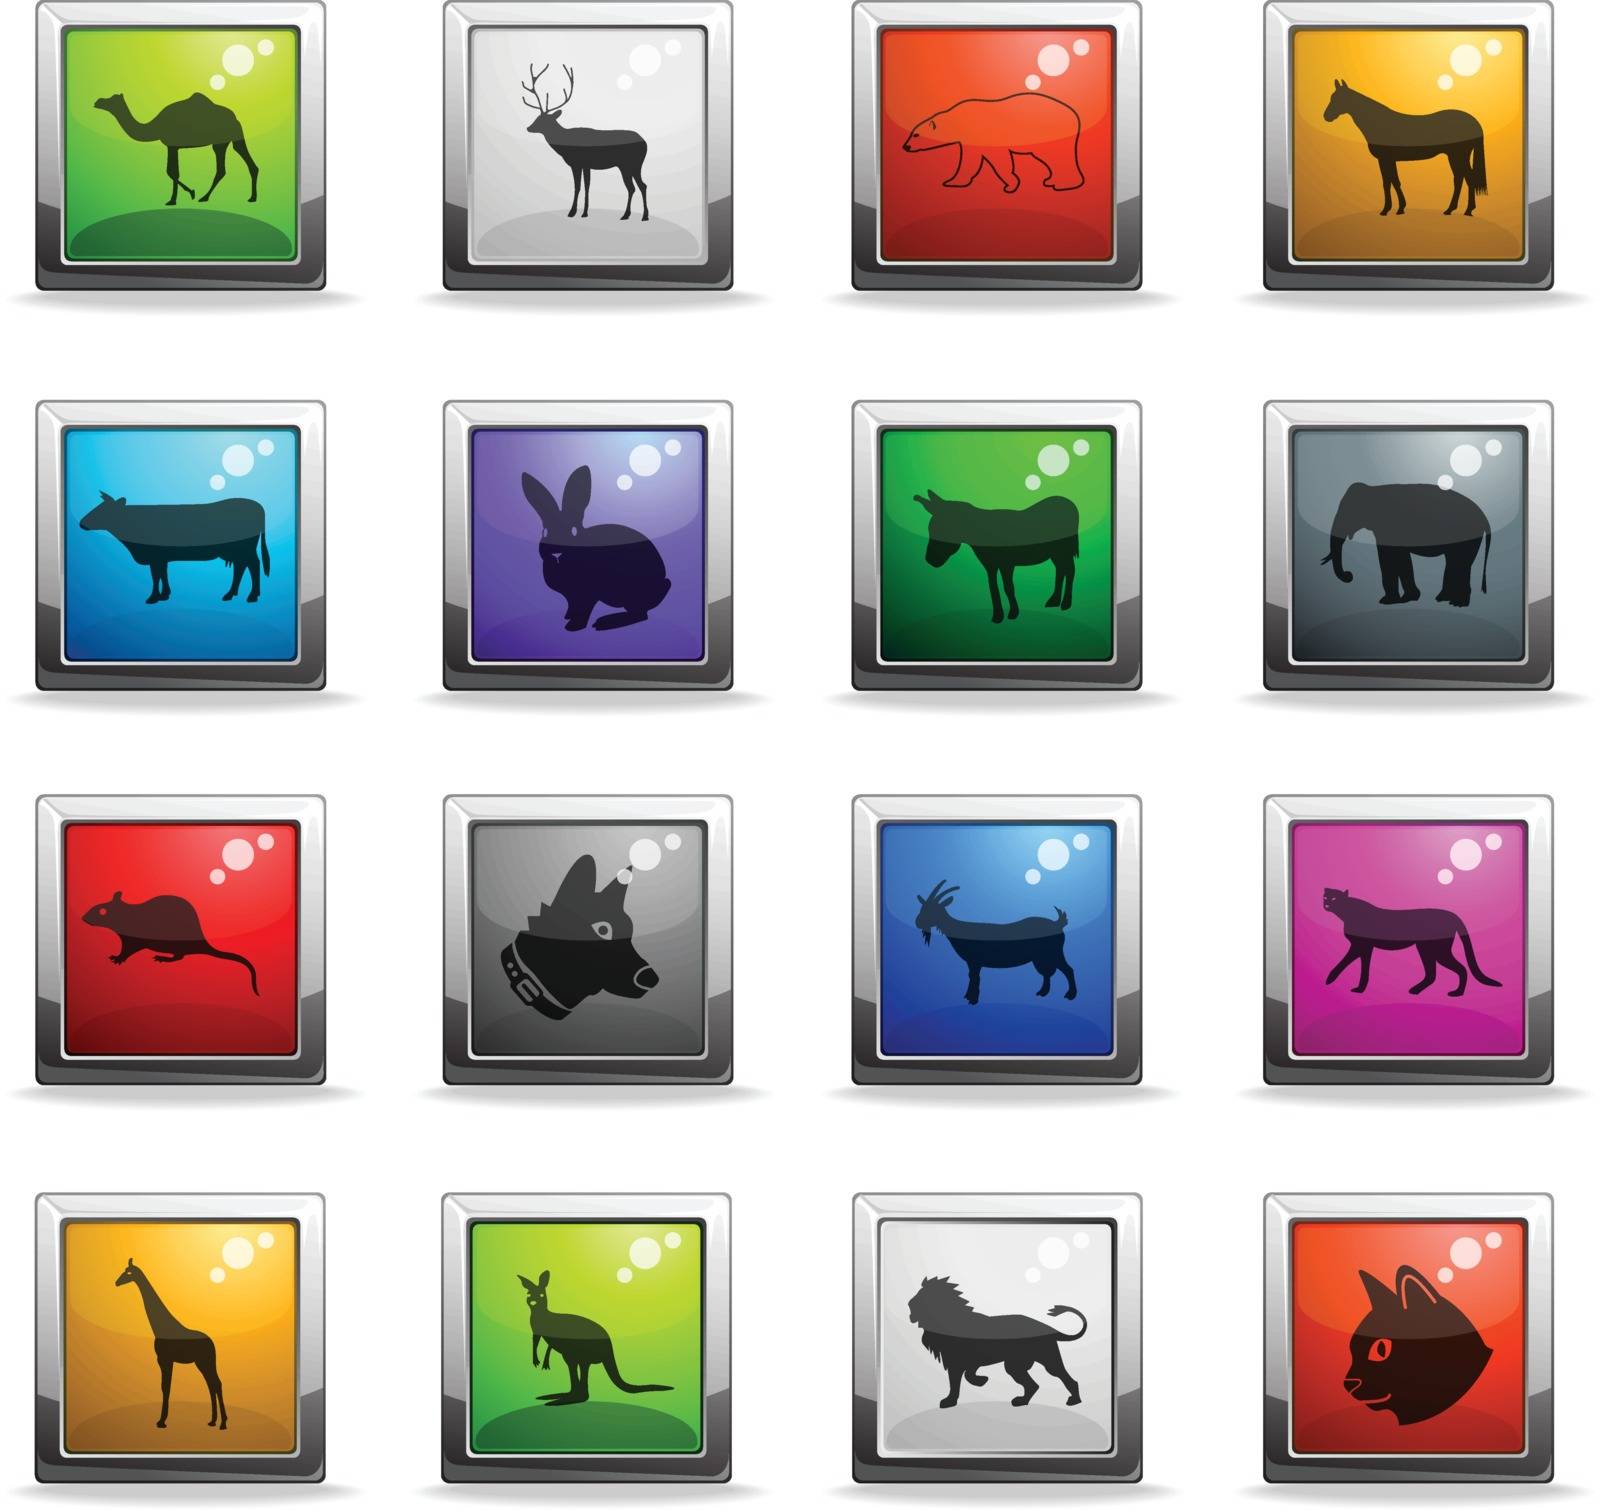 mammals web icons in square colored buttons for user interface design